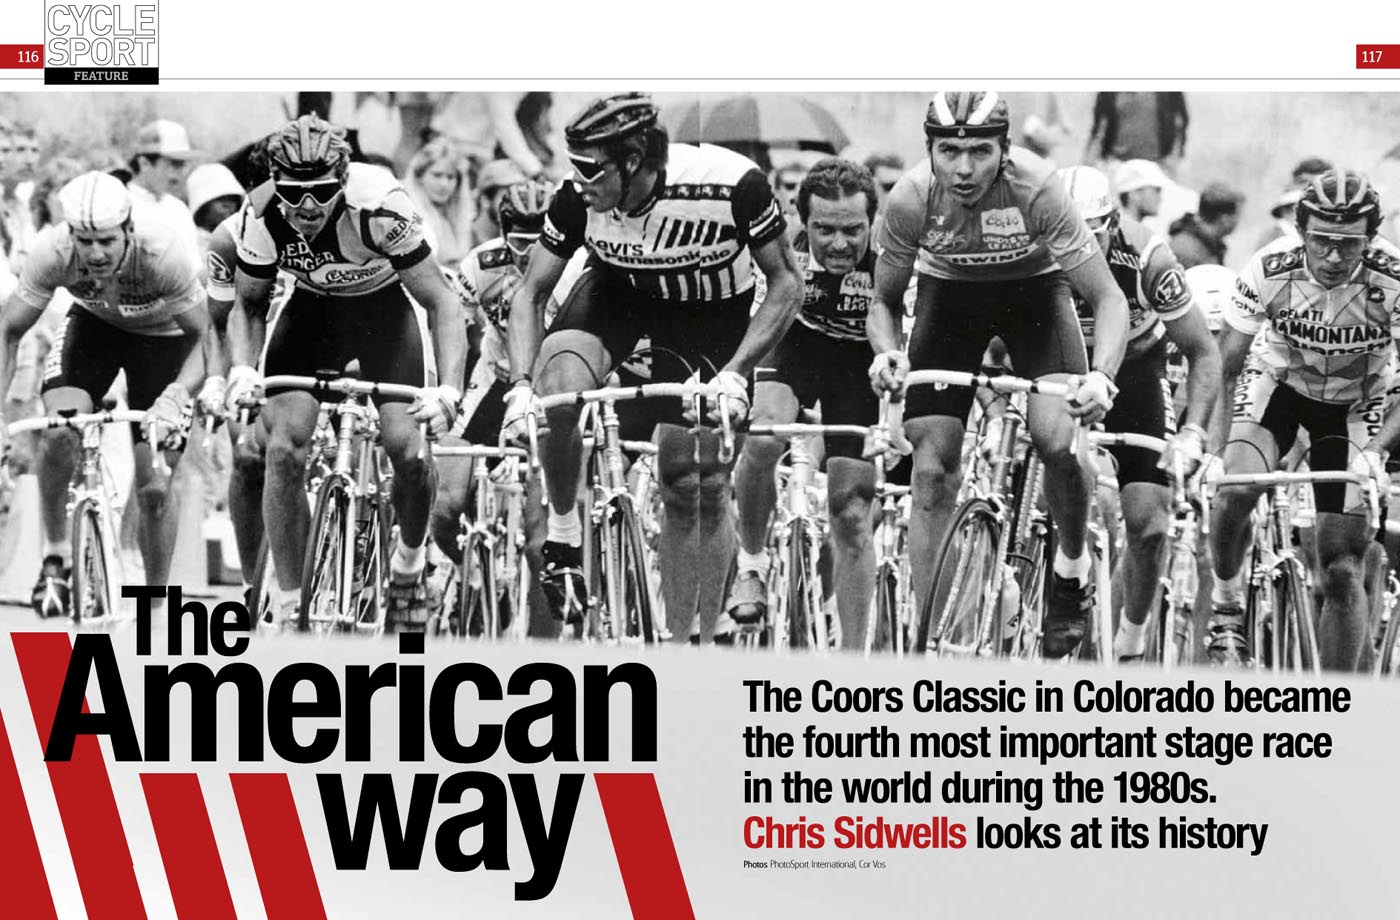 Photo: Coors Classic Cycle Sport feature. 